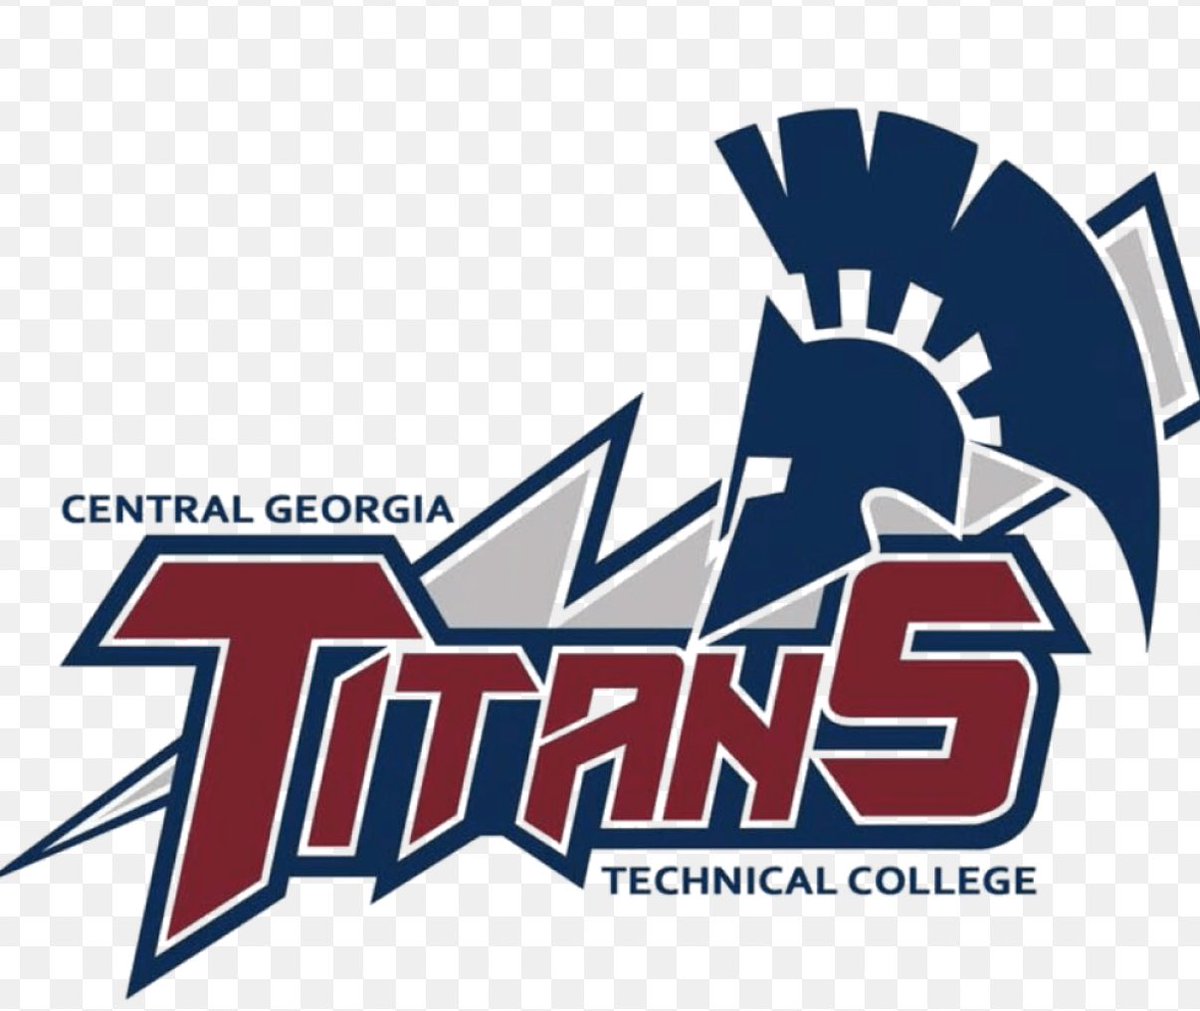 After an amazing conversation with  head coach Jordan I’m honored to have received a full ride offer to continue my academics and athletics #gotitans